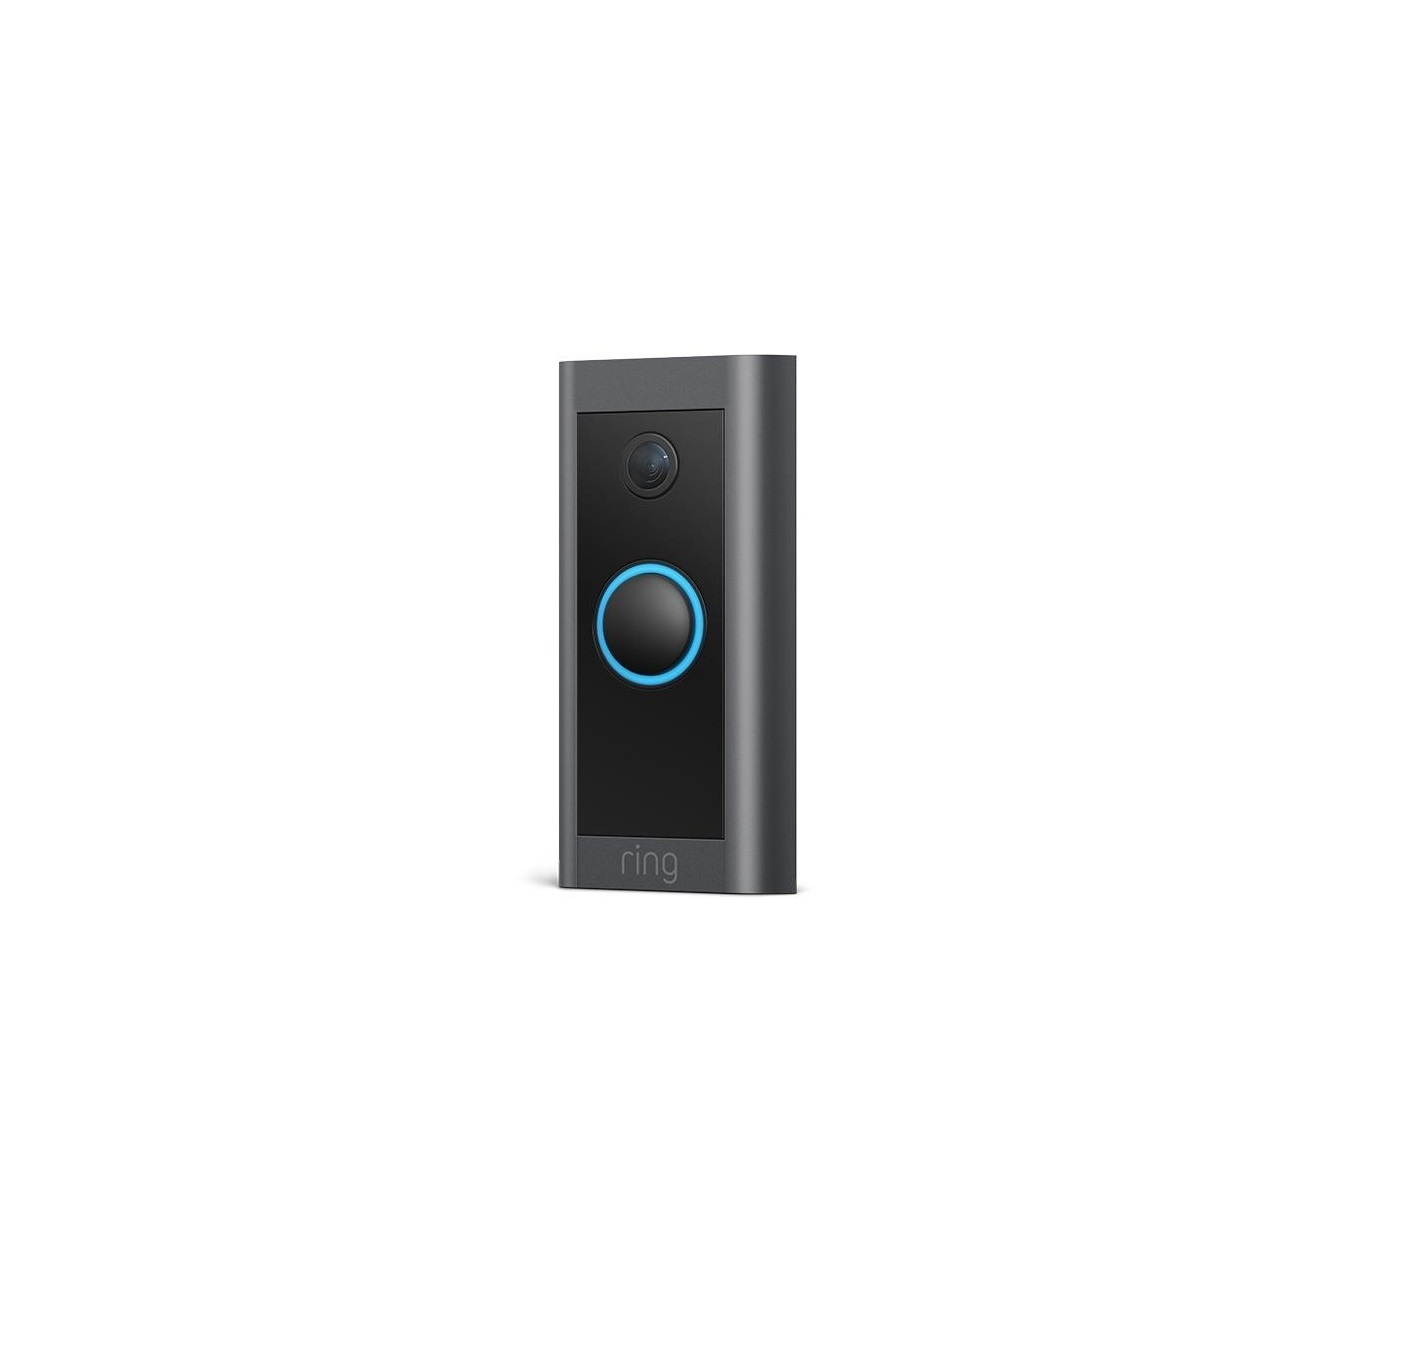 ring Doorbell Wired User Guide